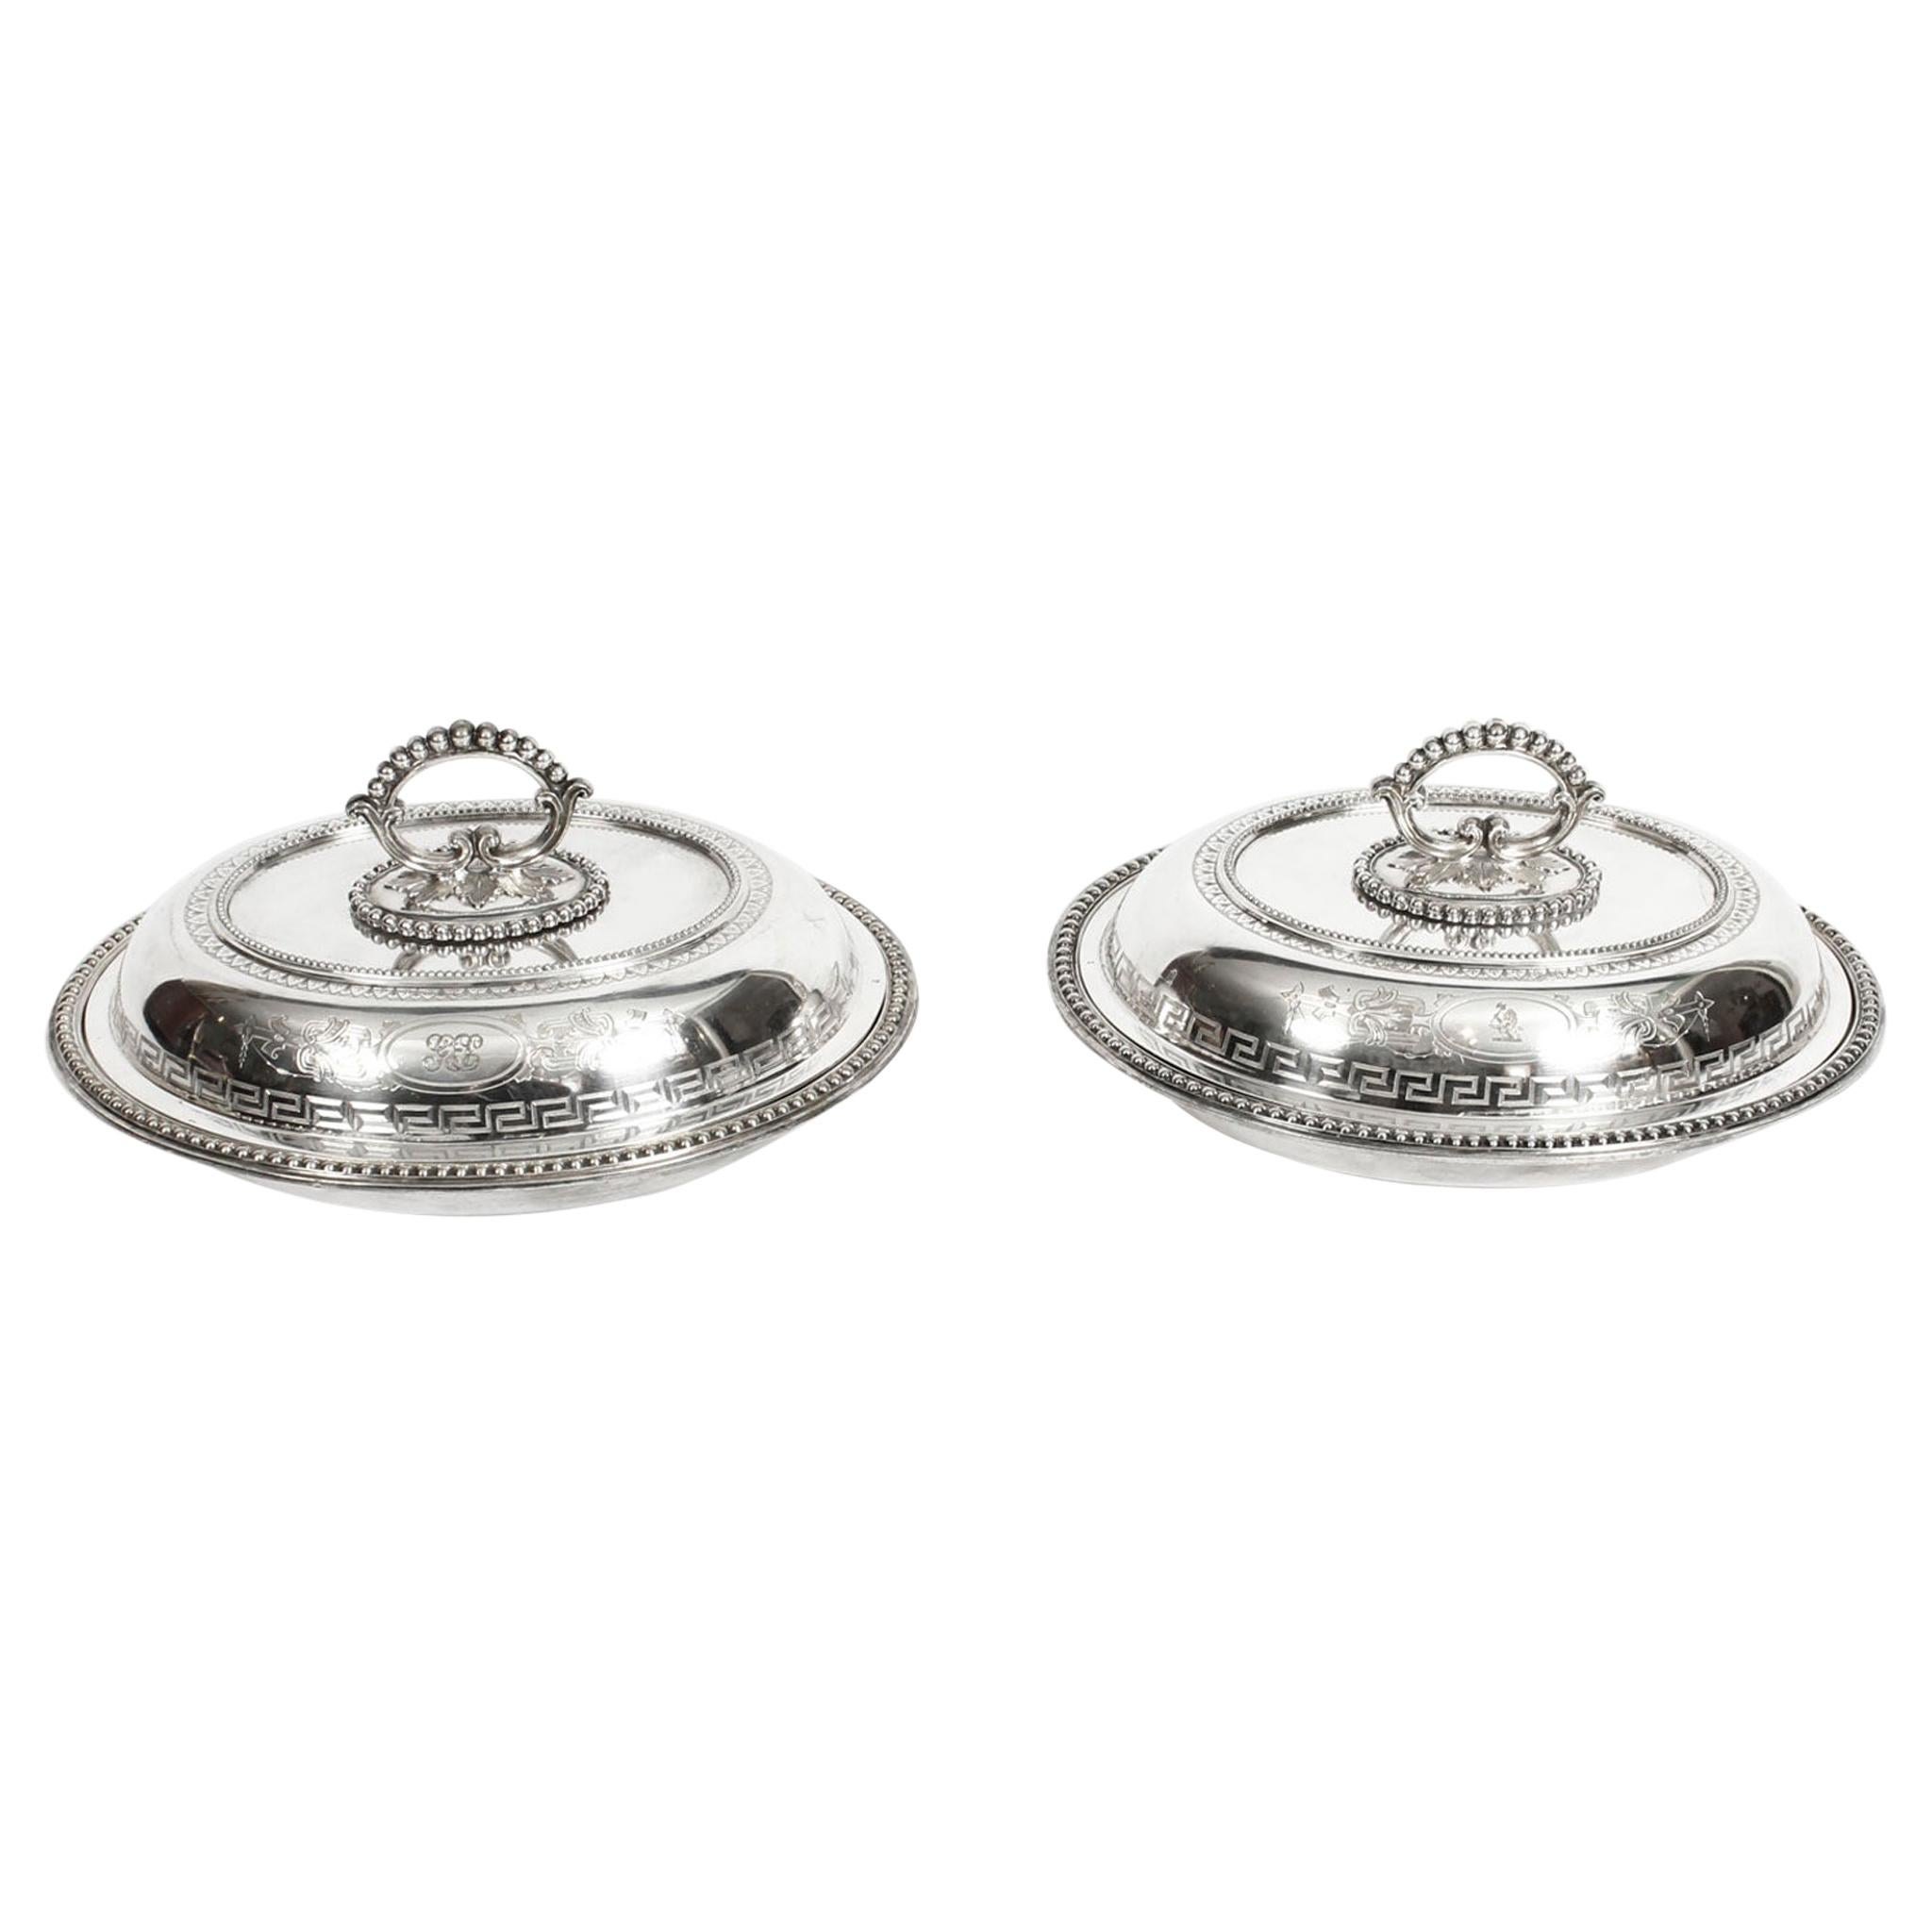 19th Century Pair of Silver Plated Entree Dishes with Greek Key